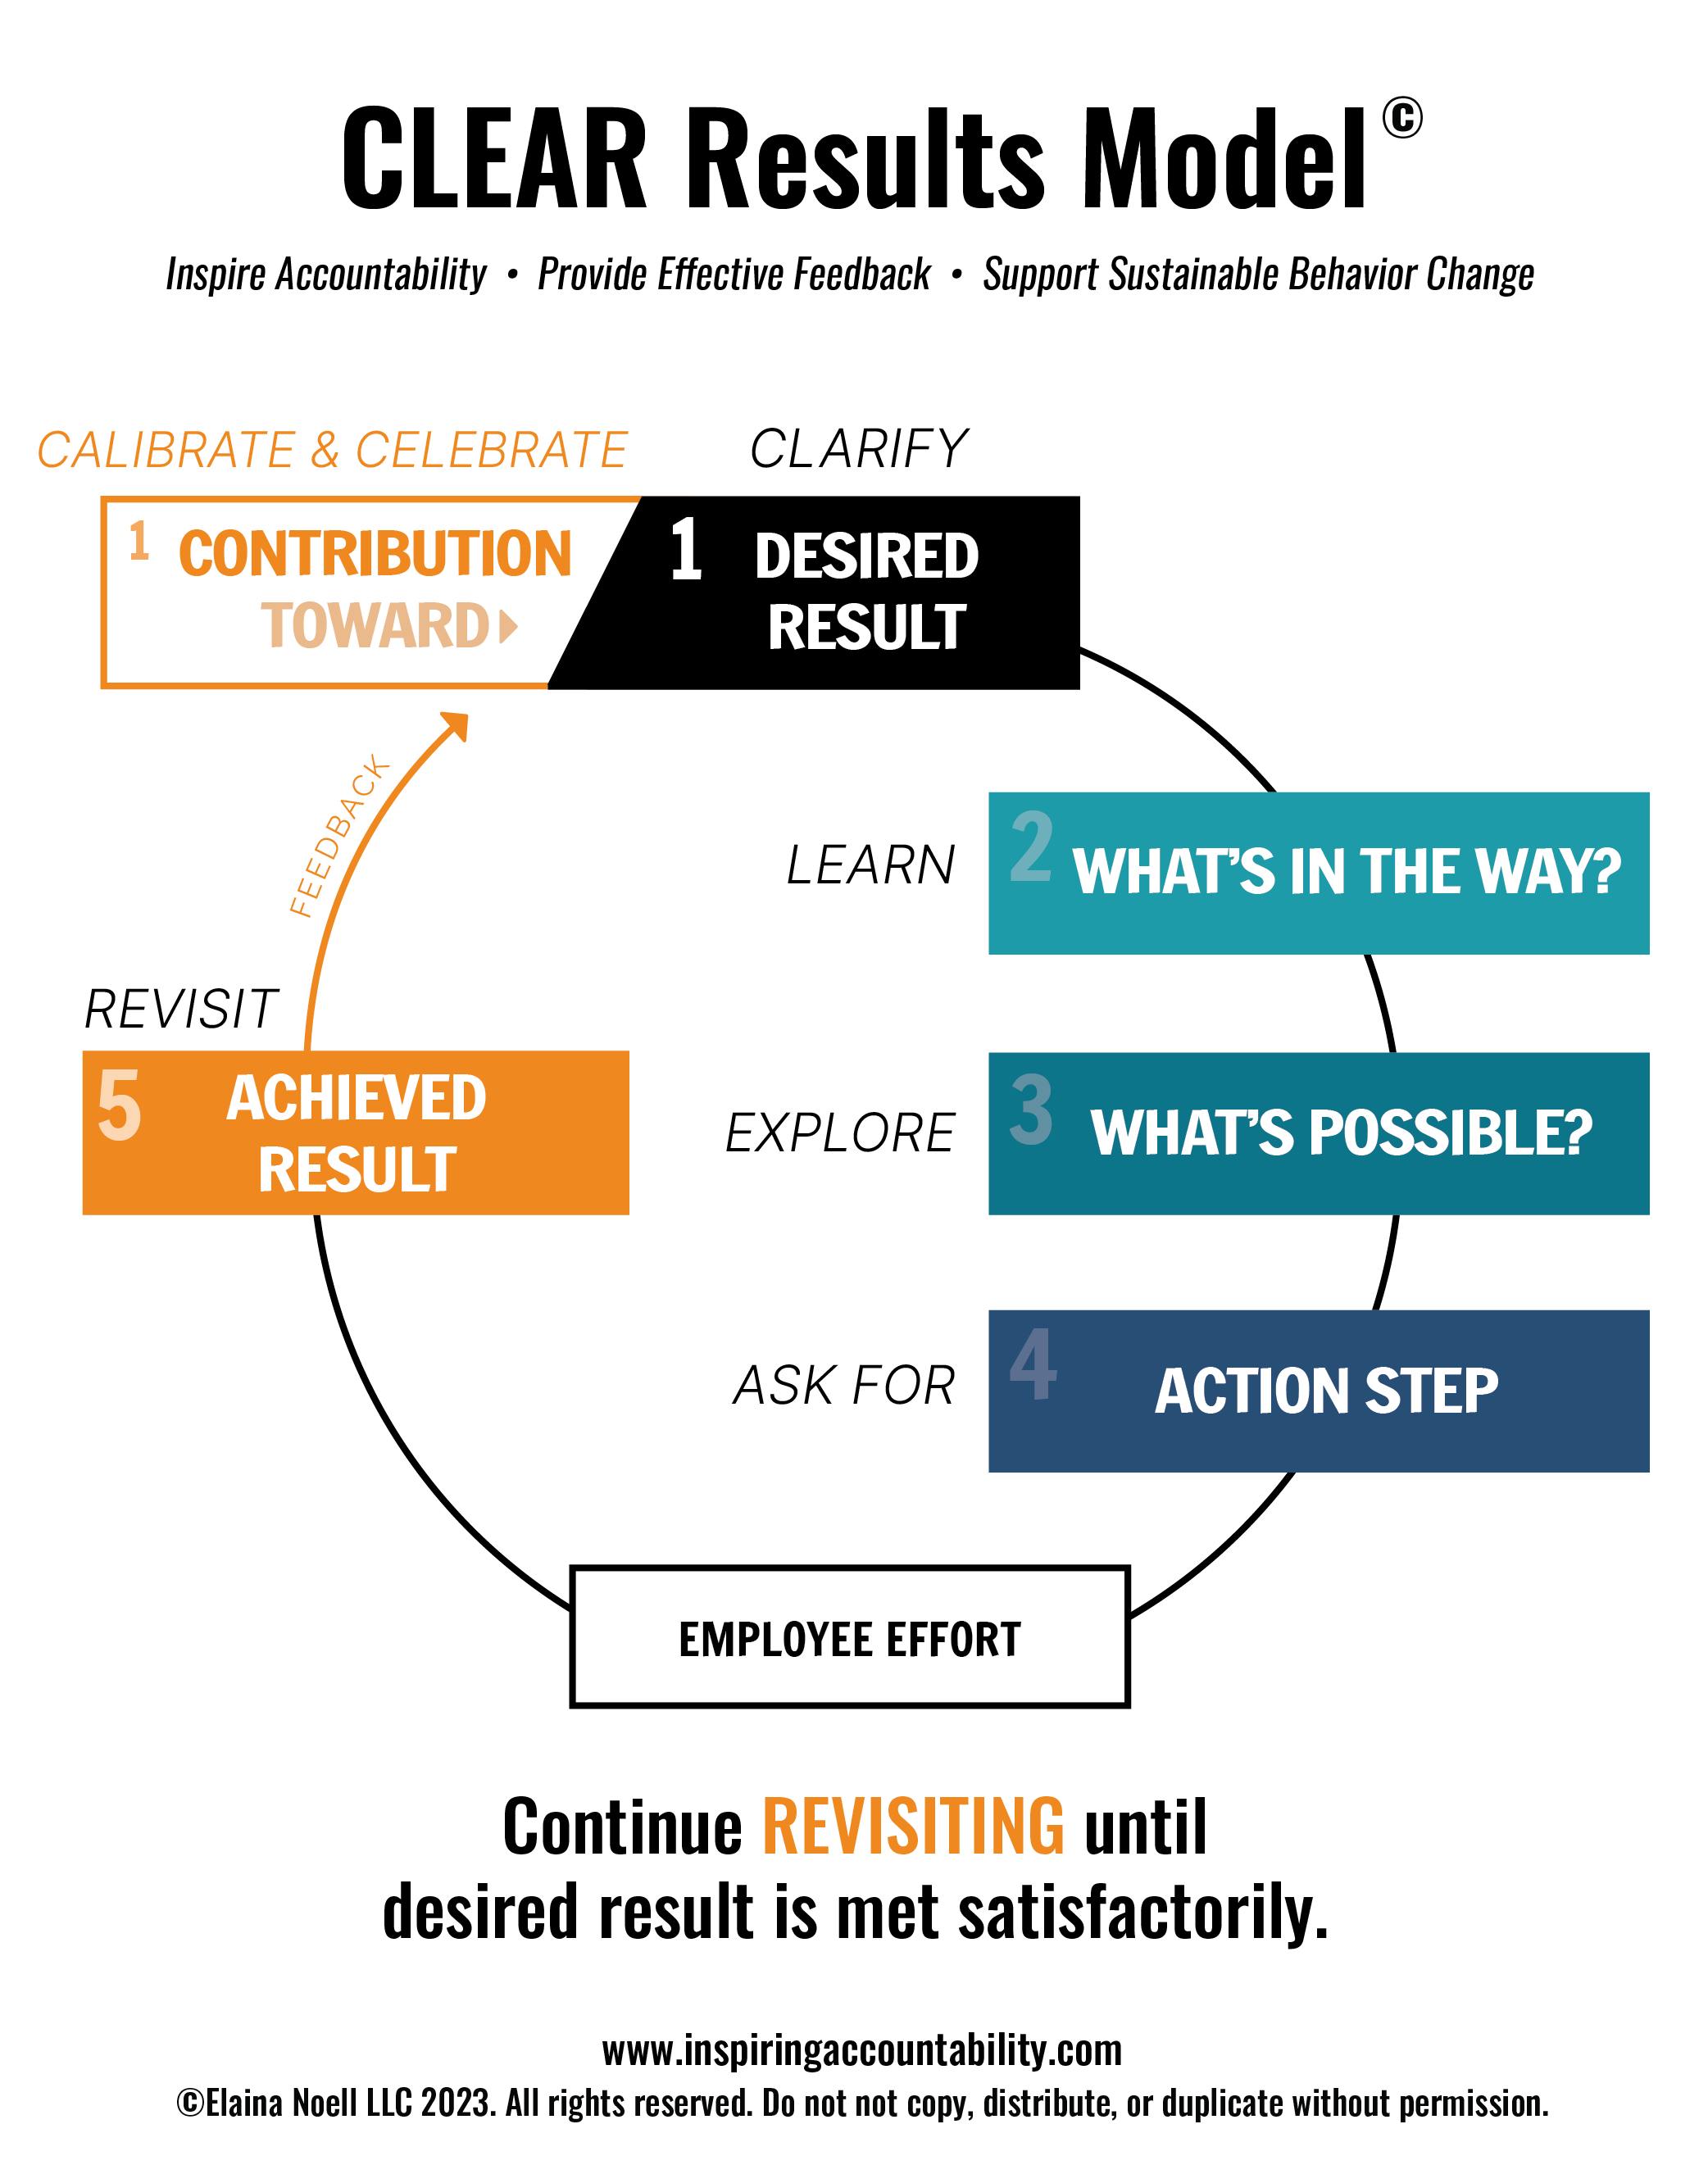 CLEAR Results Model Accountability Model